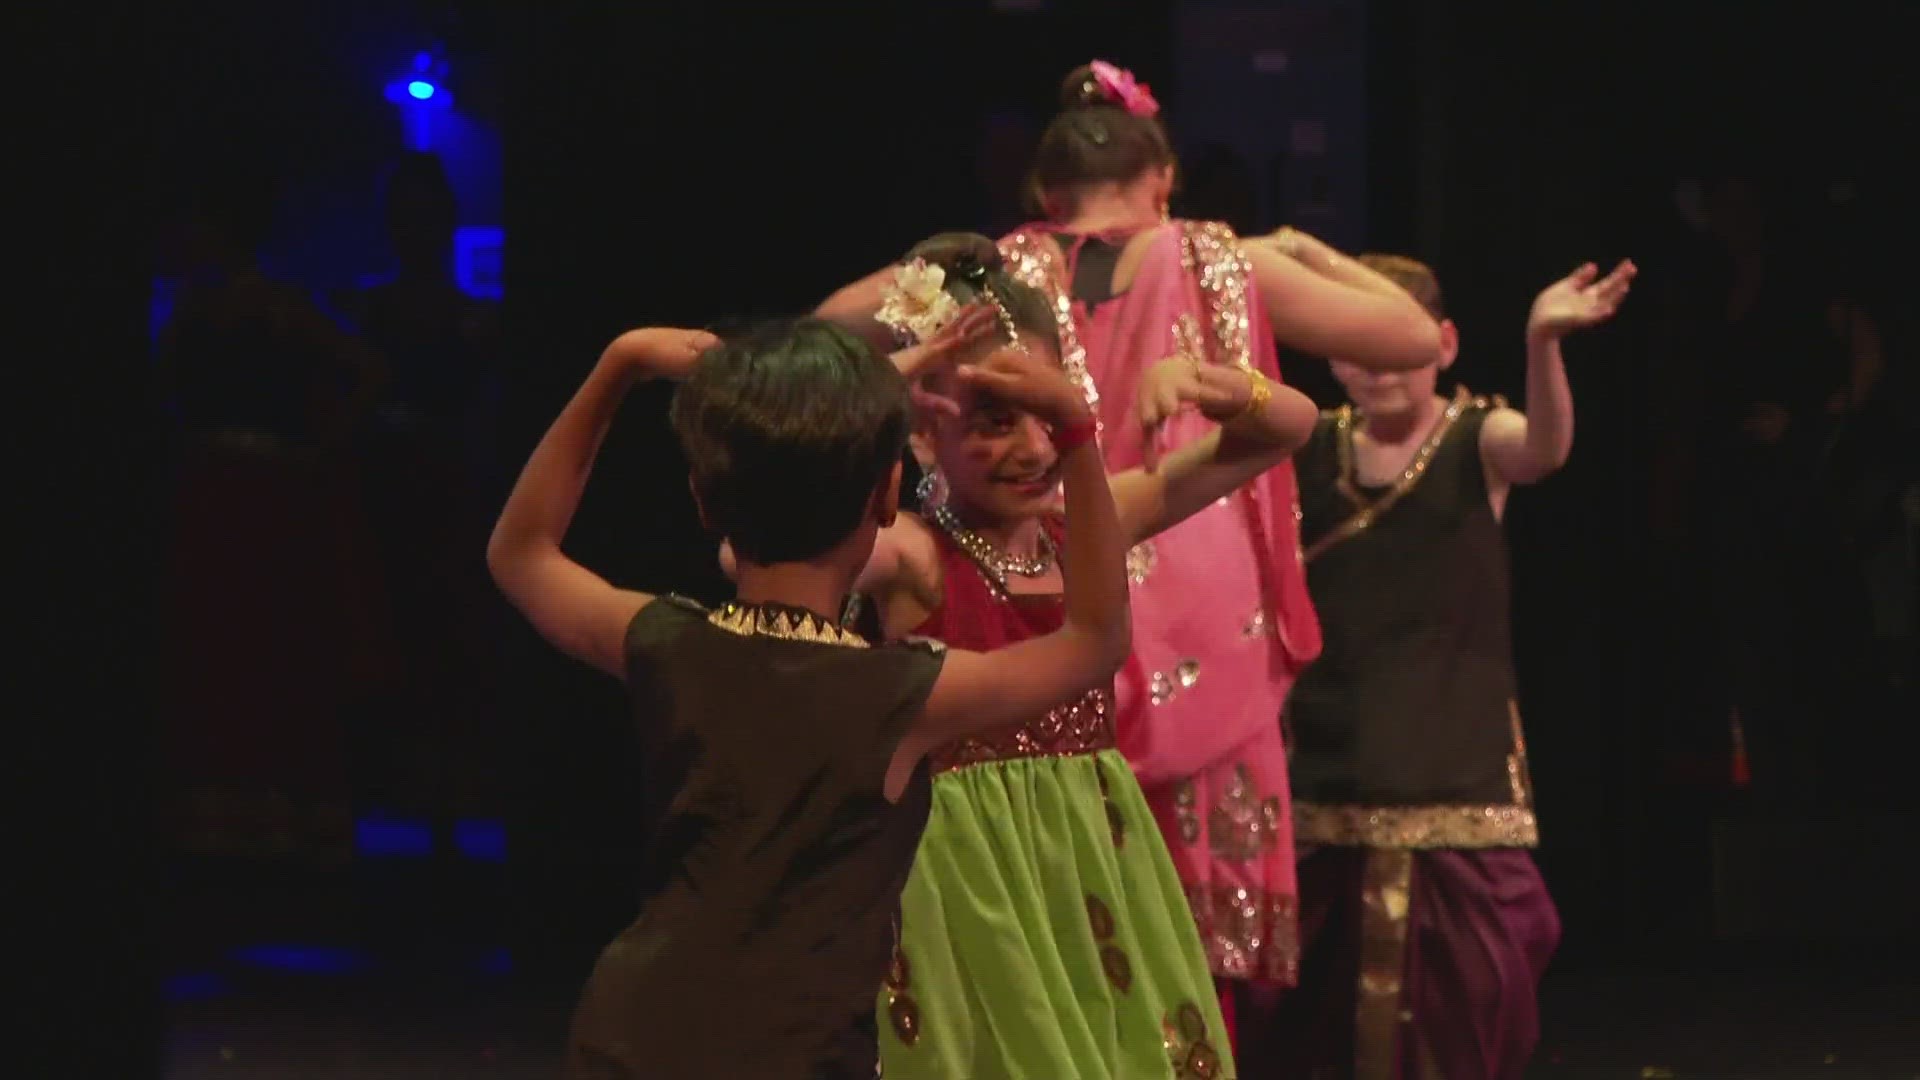 Through traditional and contemporary Indian music and dance, the Mudra Dance Studio has created a community that embraces diversity.